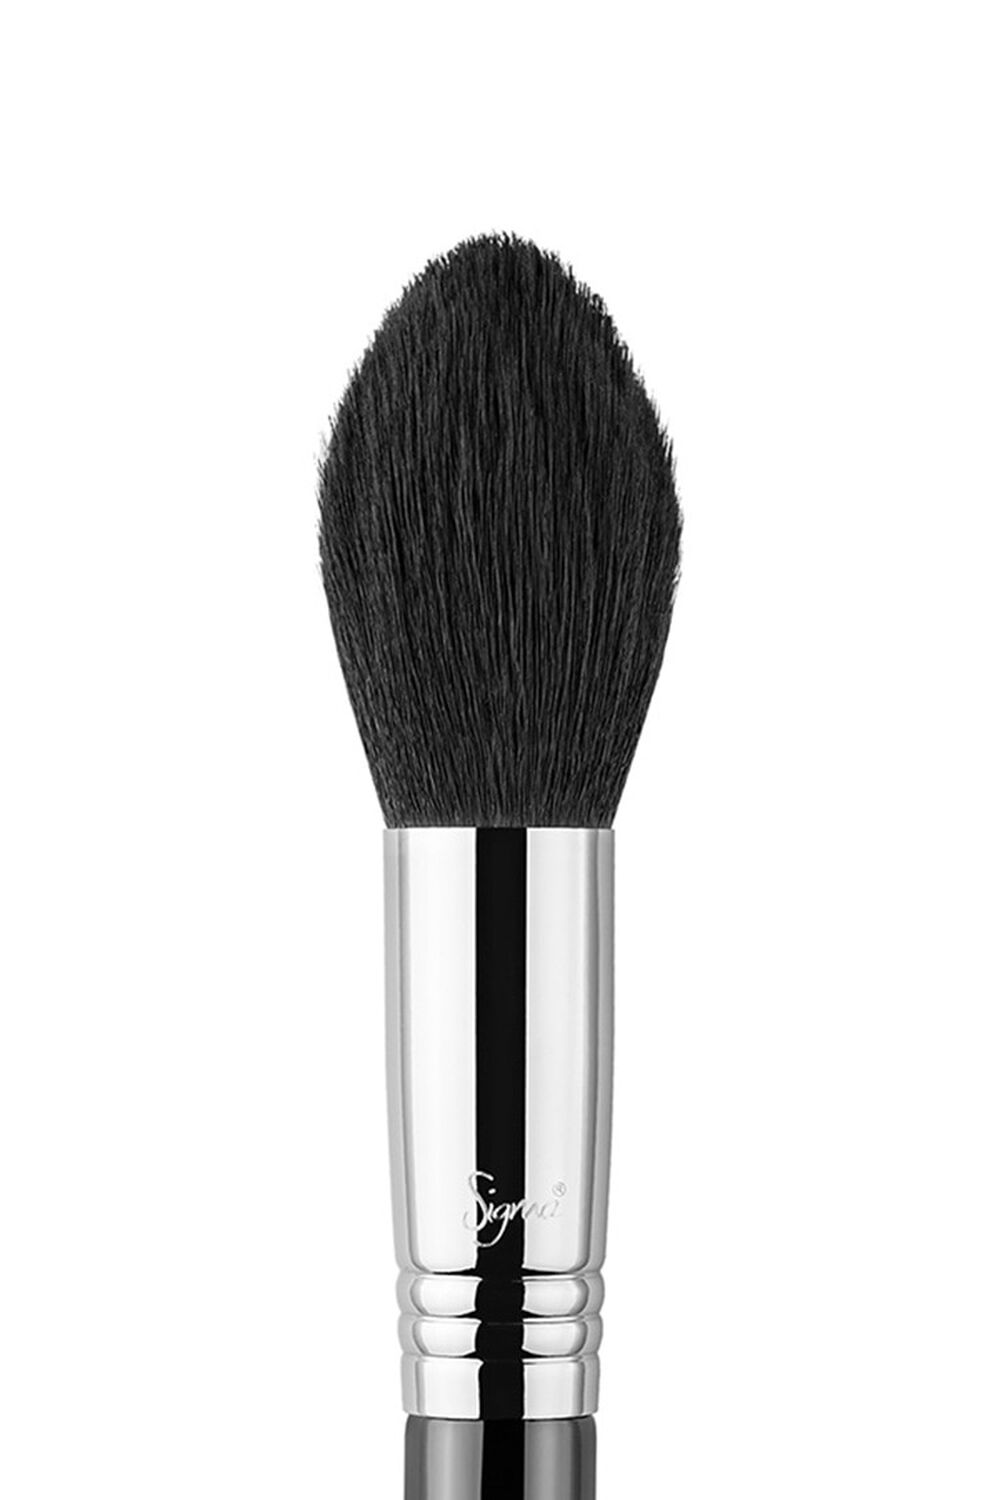 Sigma Beauty F25 – Tapered Face Brush, image 2